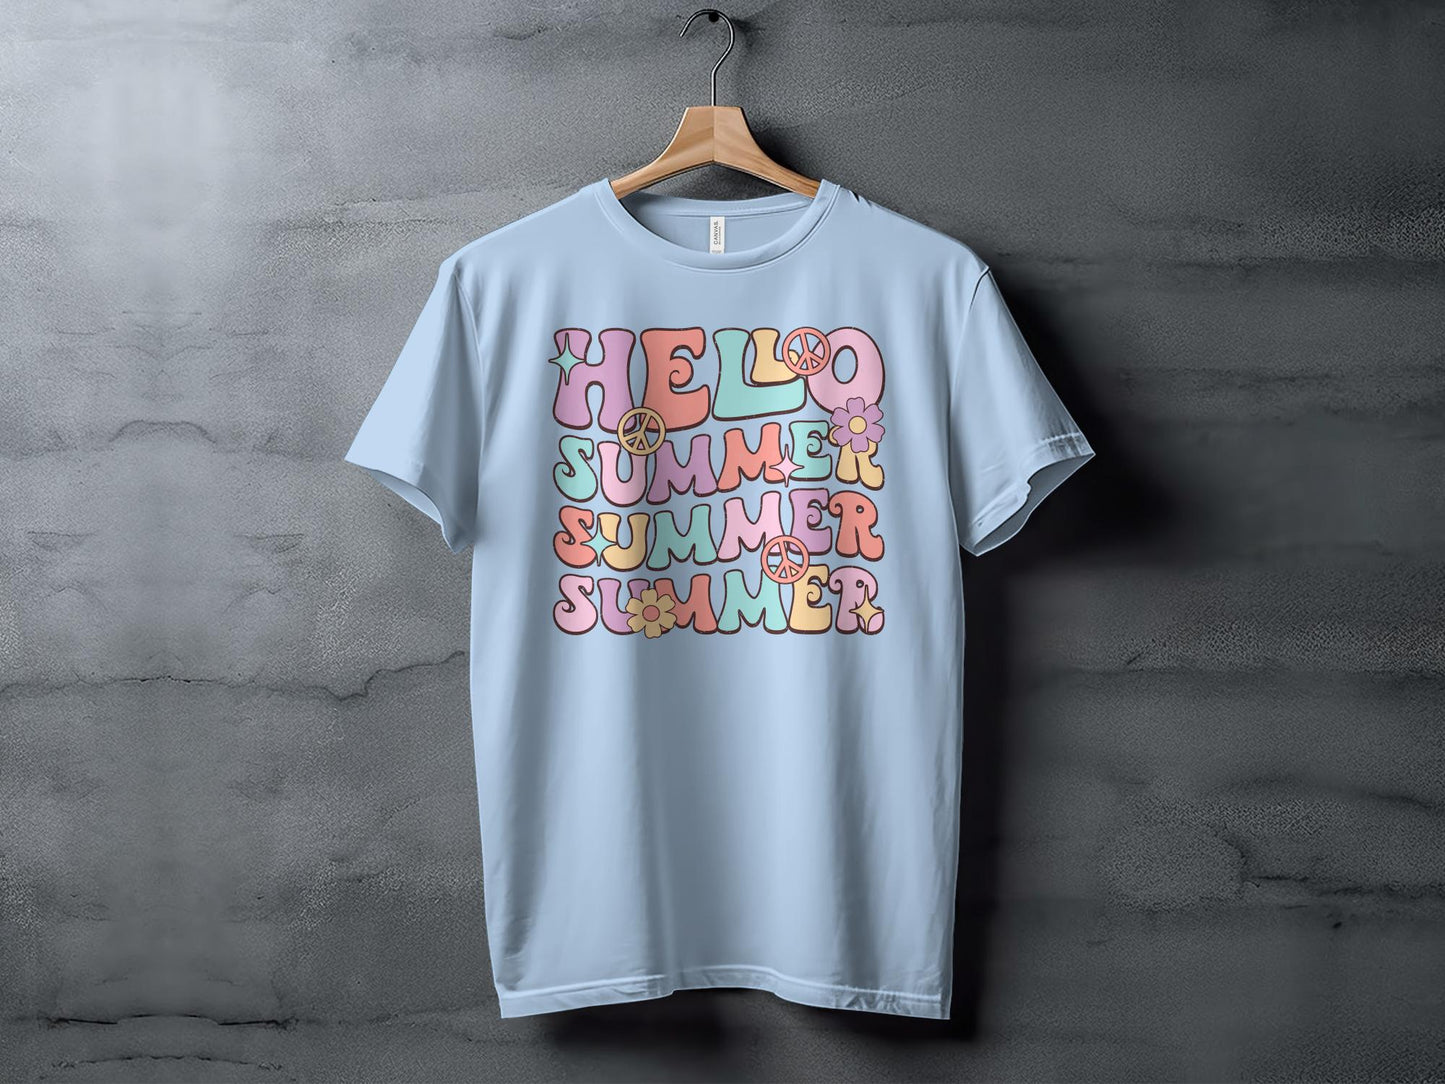 Hello Summer T-Shirt with Retro Hippie Design, Colorful Vintage Style Tee, Unisex Casual Fashion Top